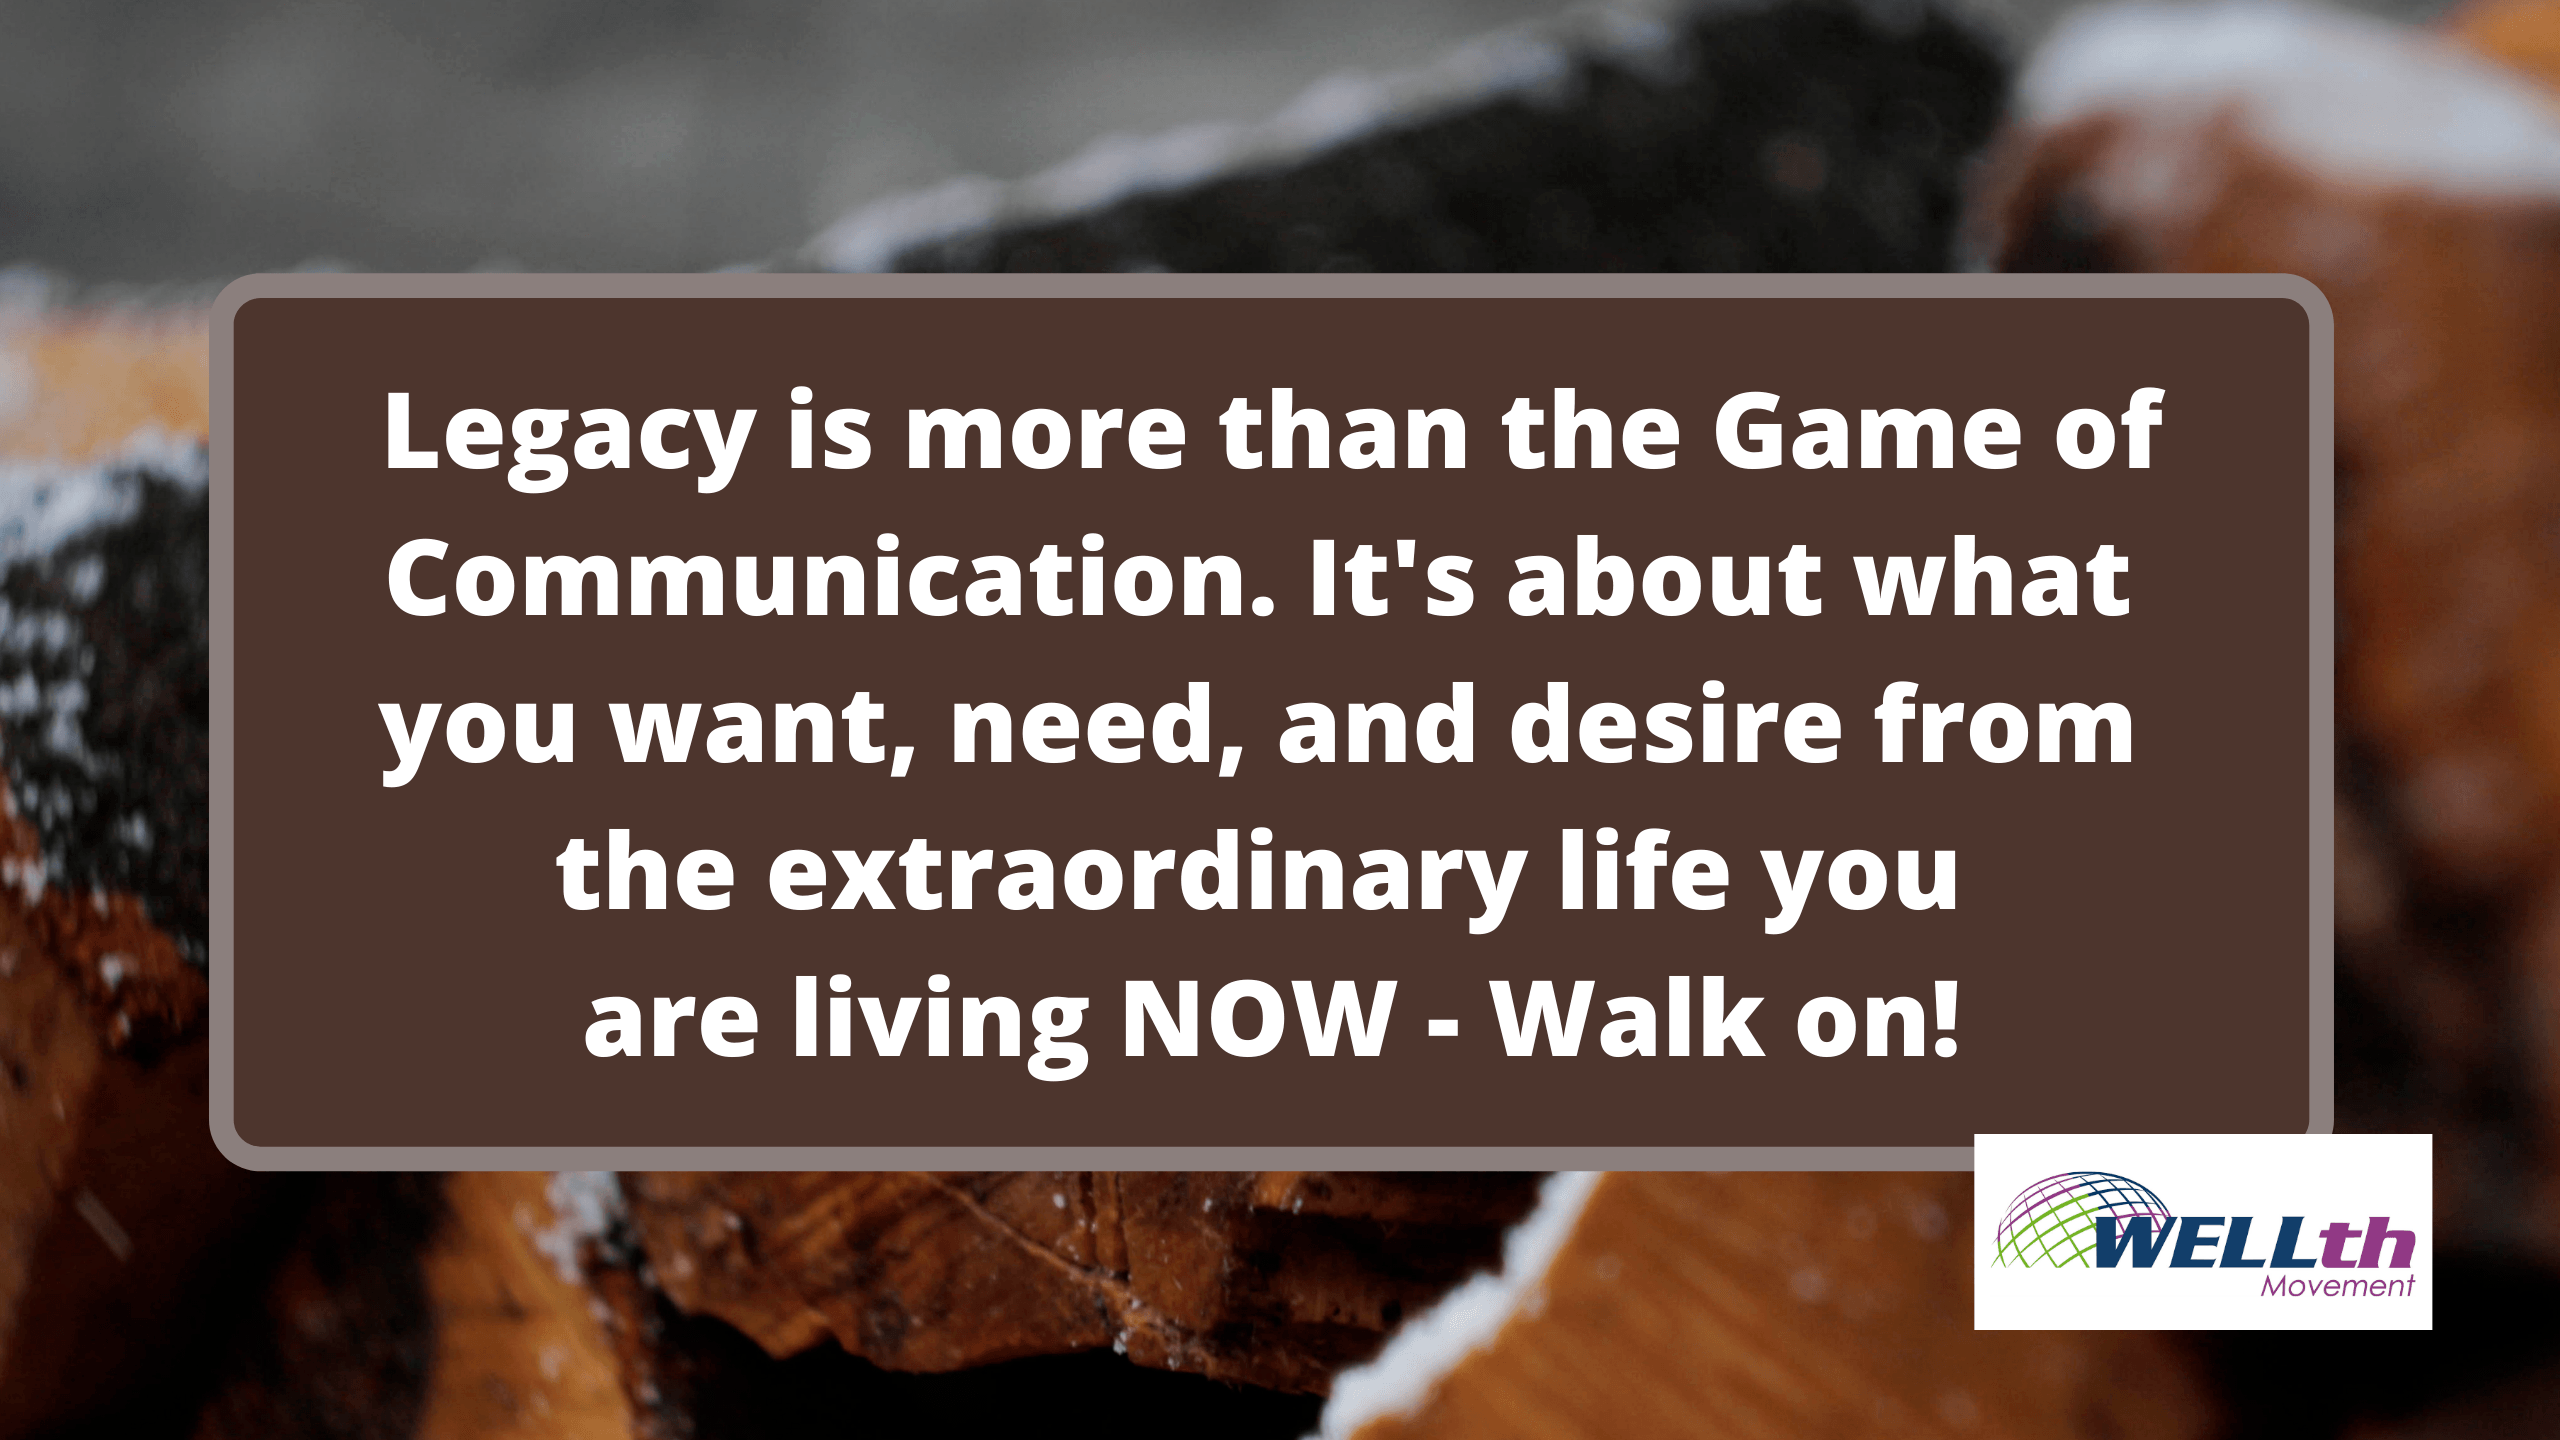 Legacy More Than Game of Communication